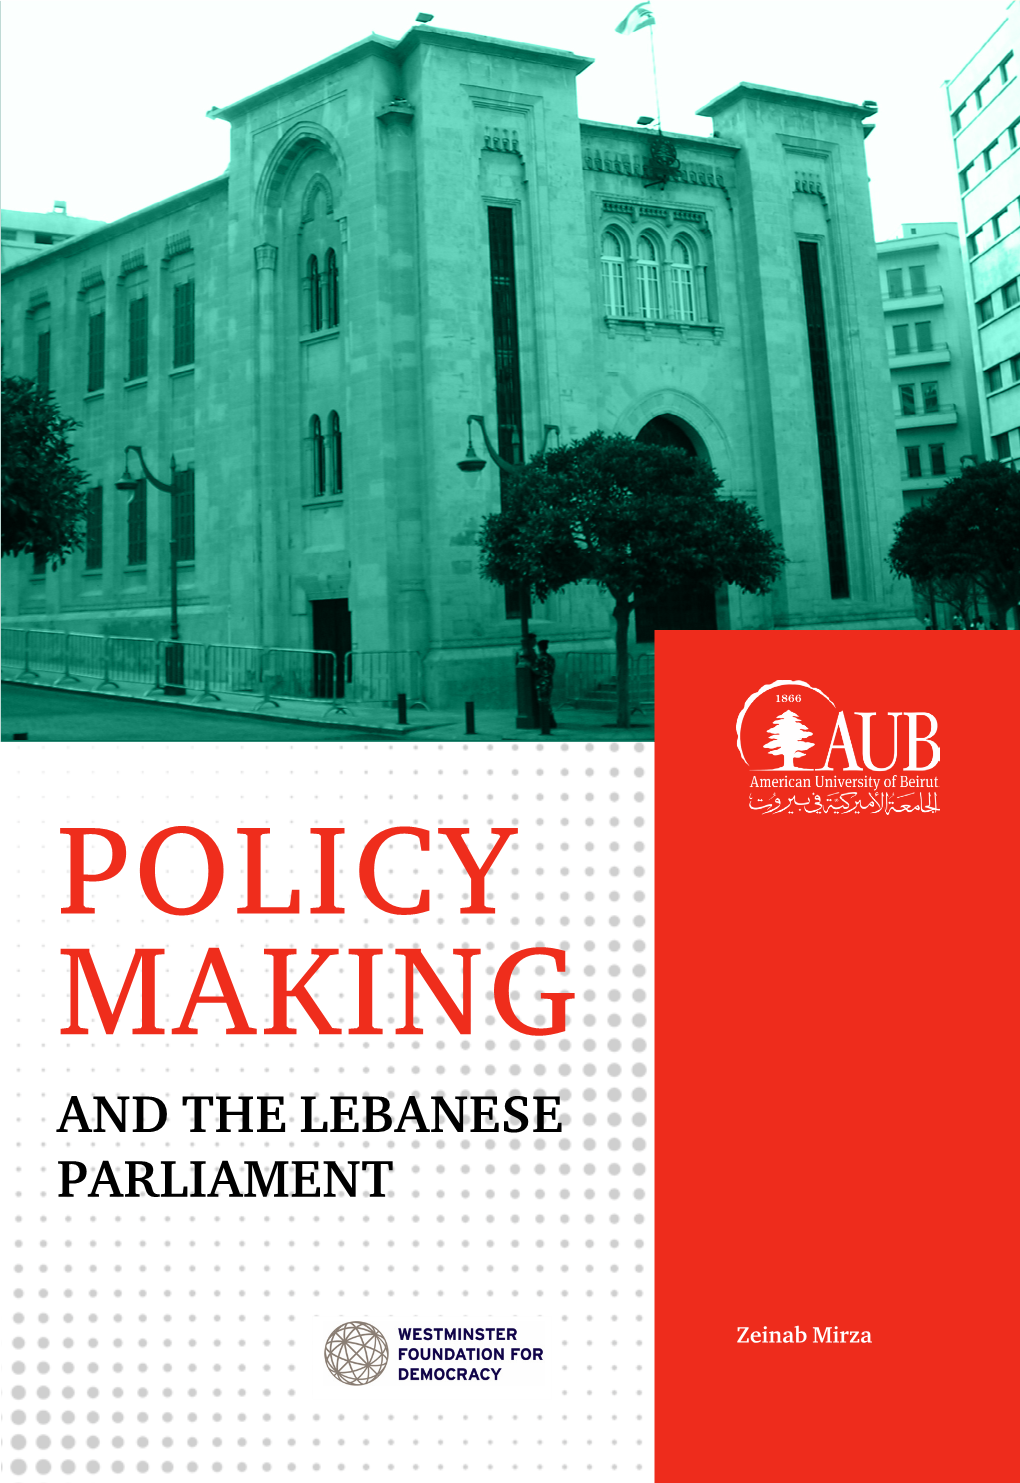 Zeinab Mirza Policy Making and the Lebanese Parliament (London-Beirut, 2020) ACKNOWLEDGEMENTS